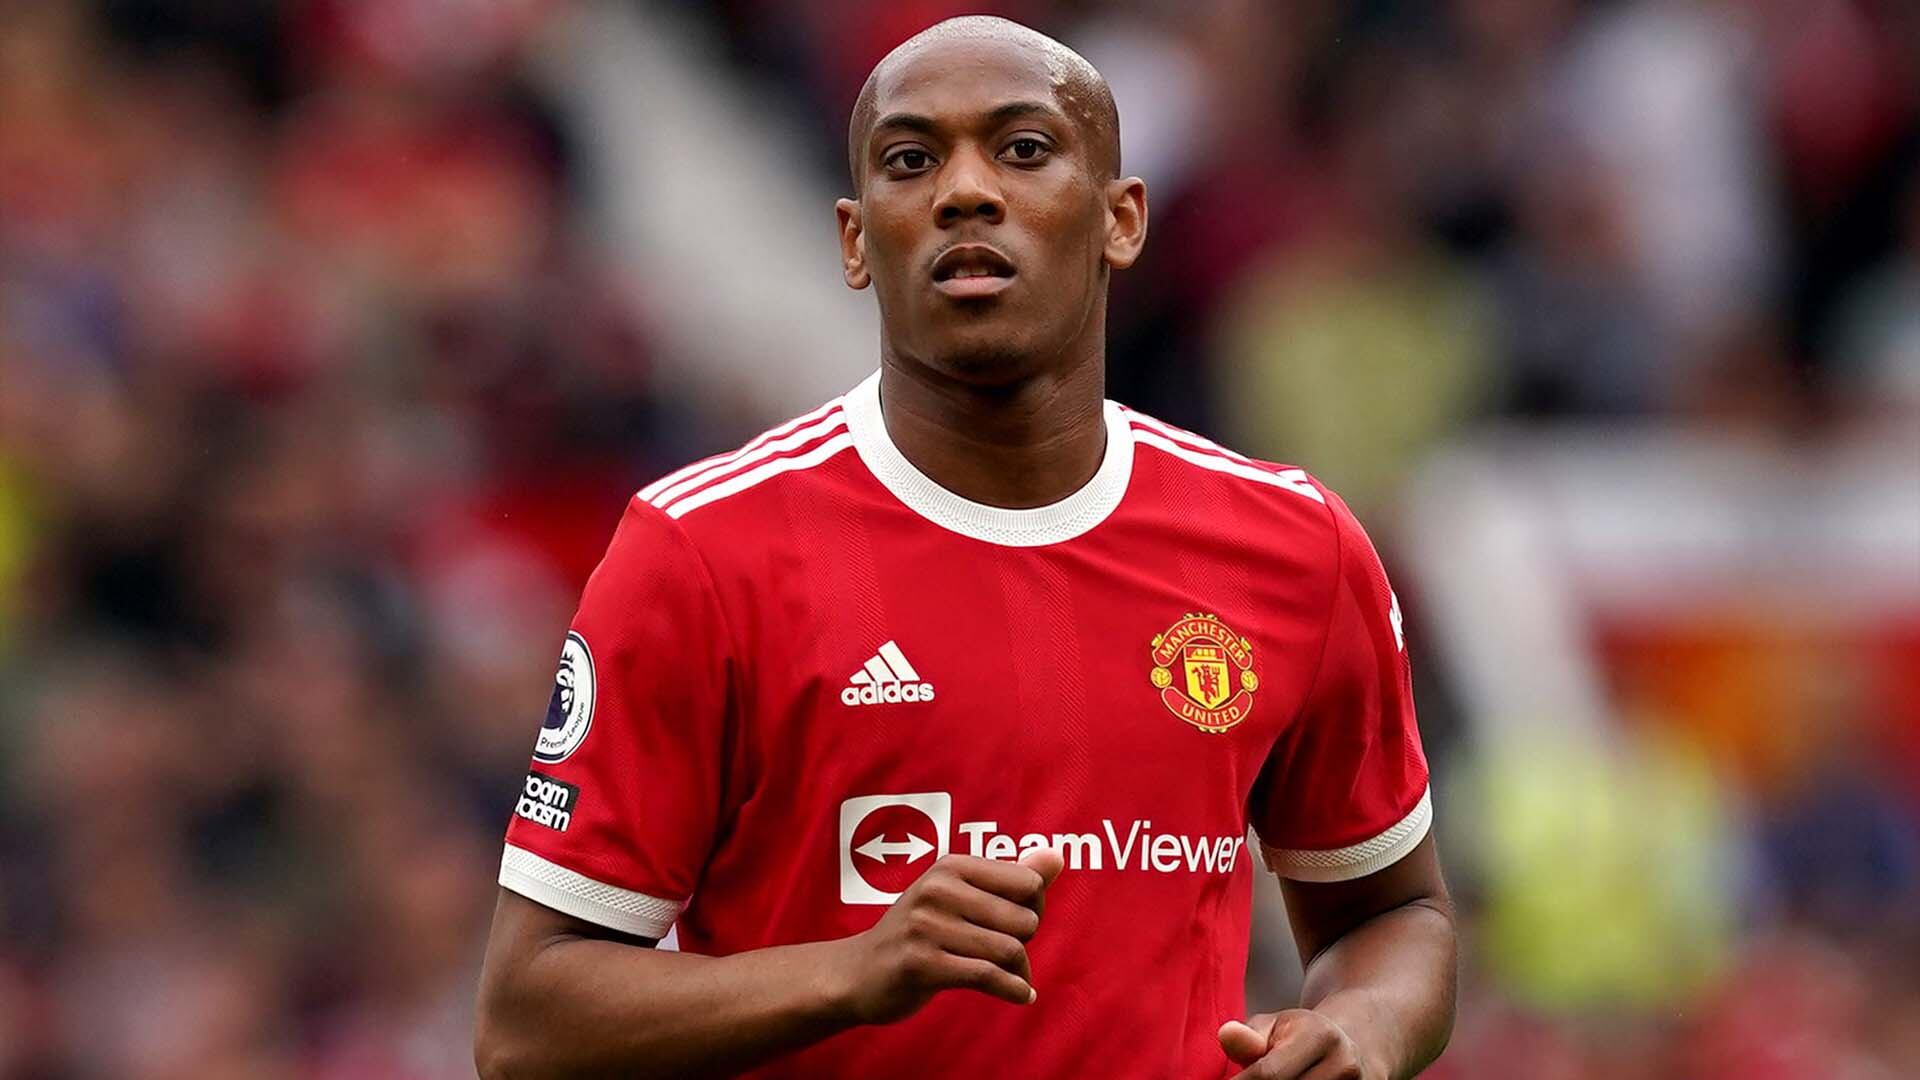 Anthony Martial to join Sevilla, according to press reports. Under what conditions did he accept?